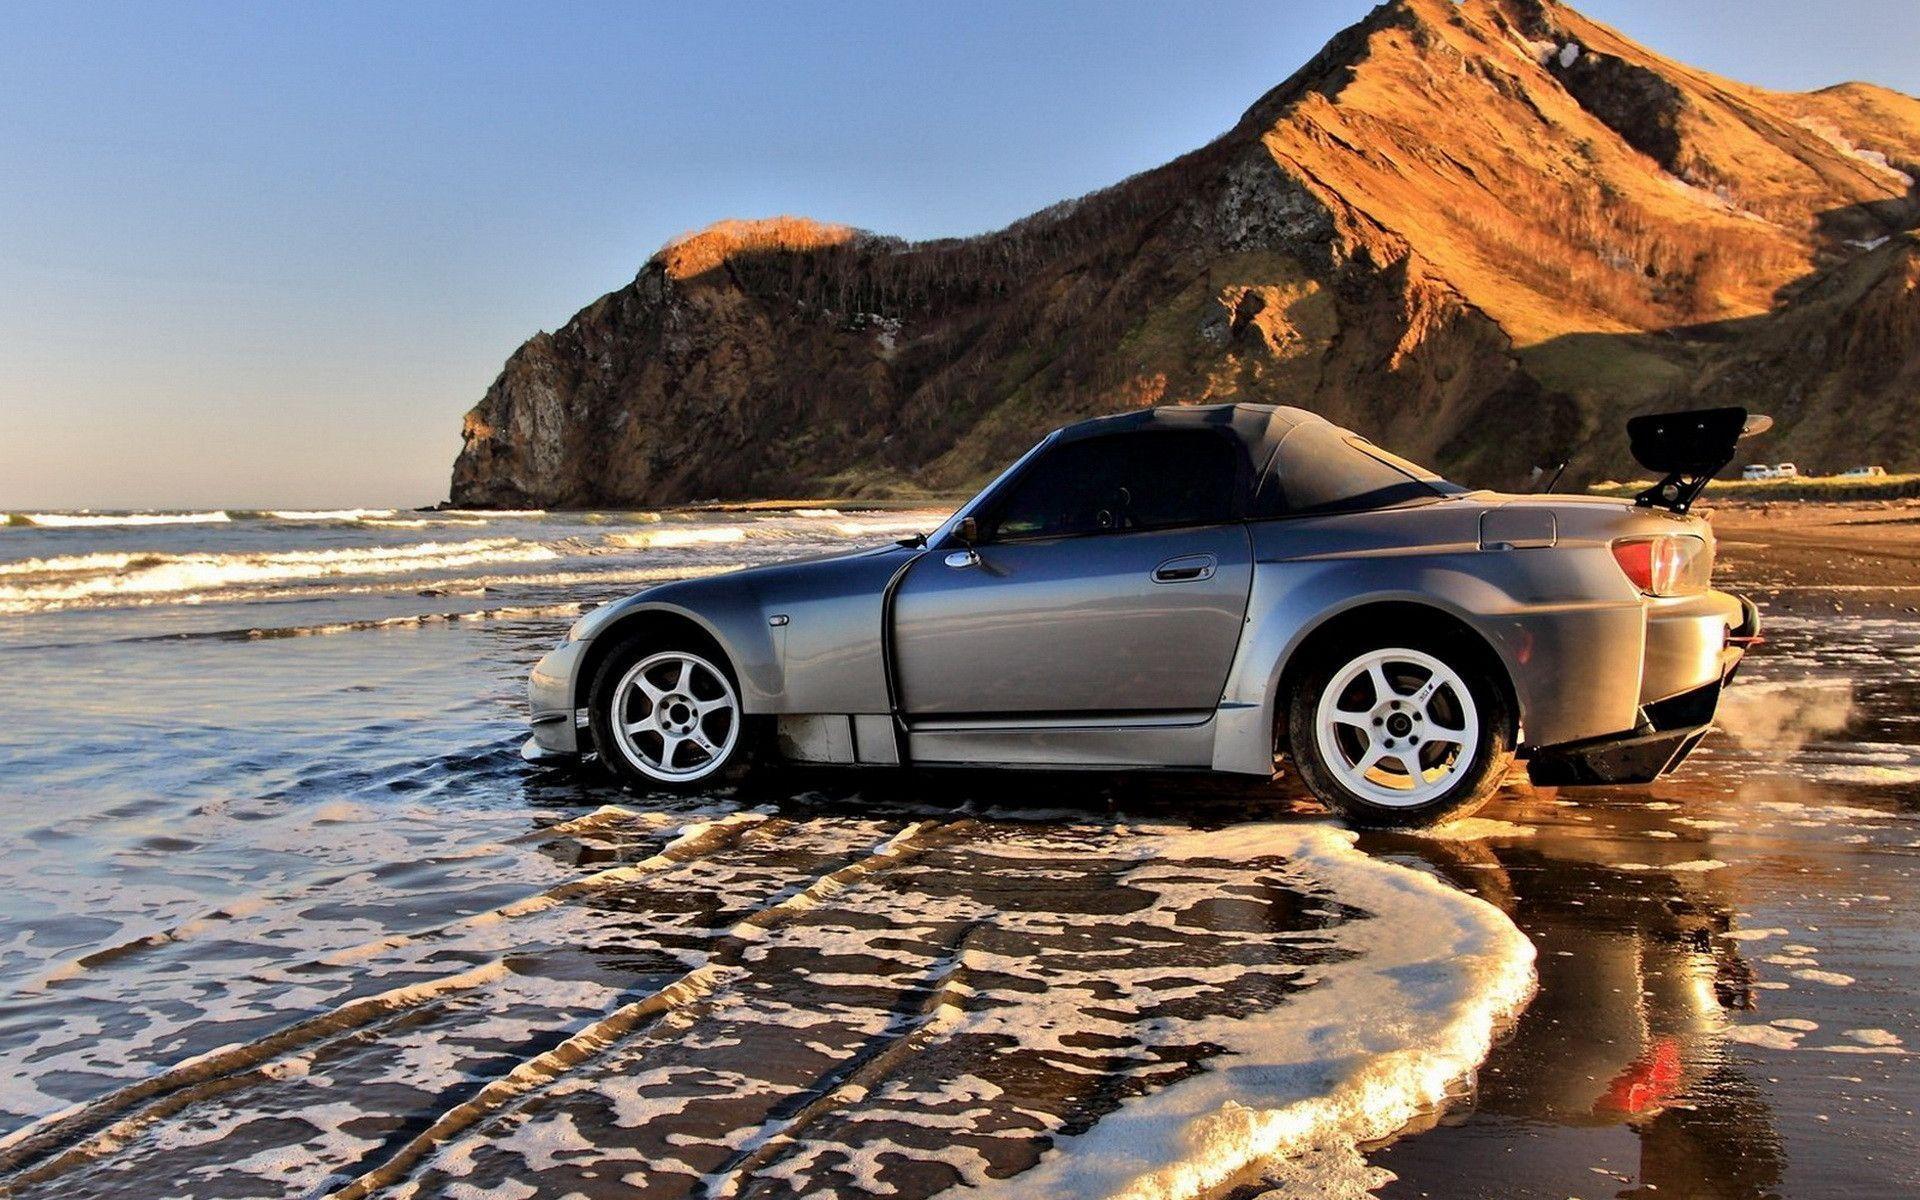 Honda S2000 wallpaper and image, picture, photo